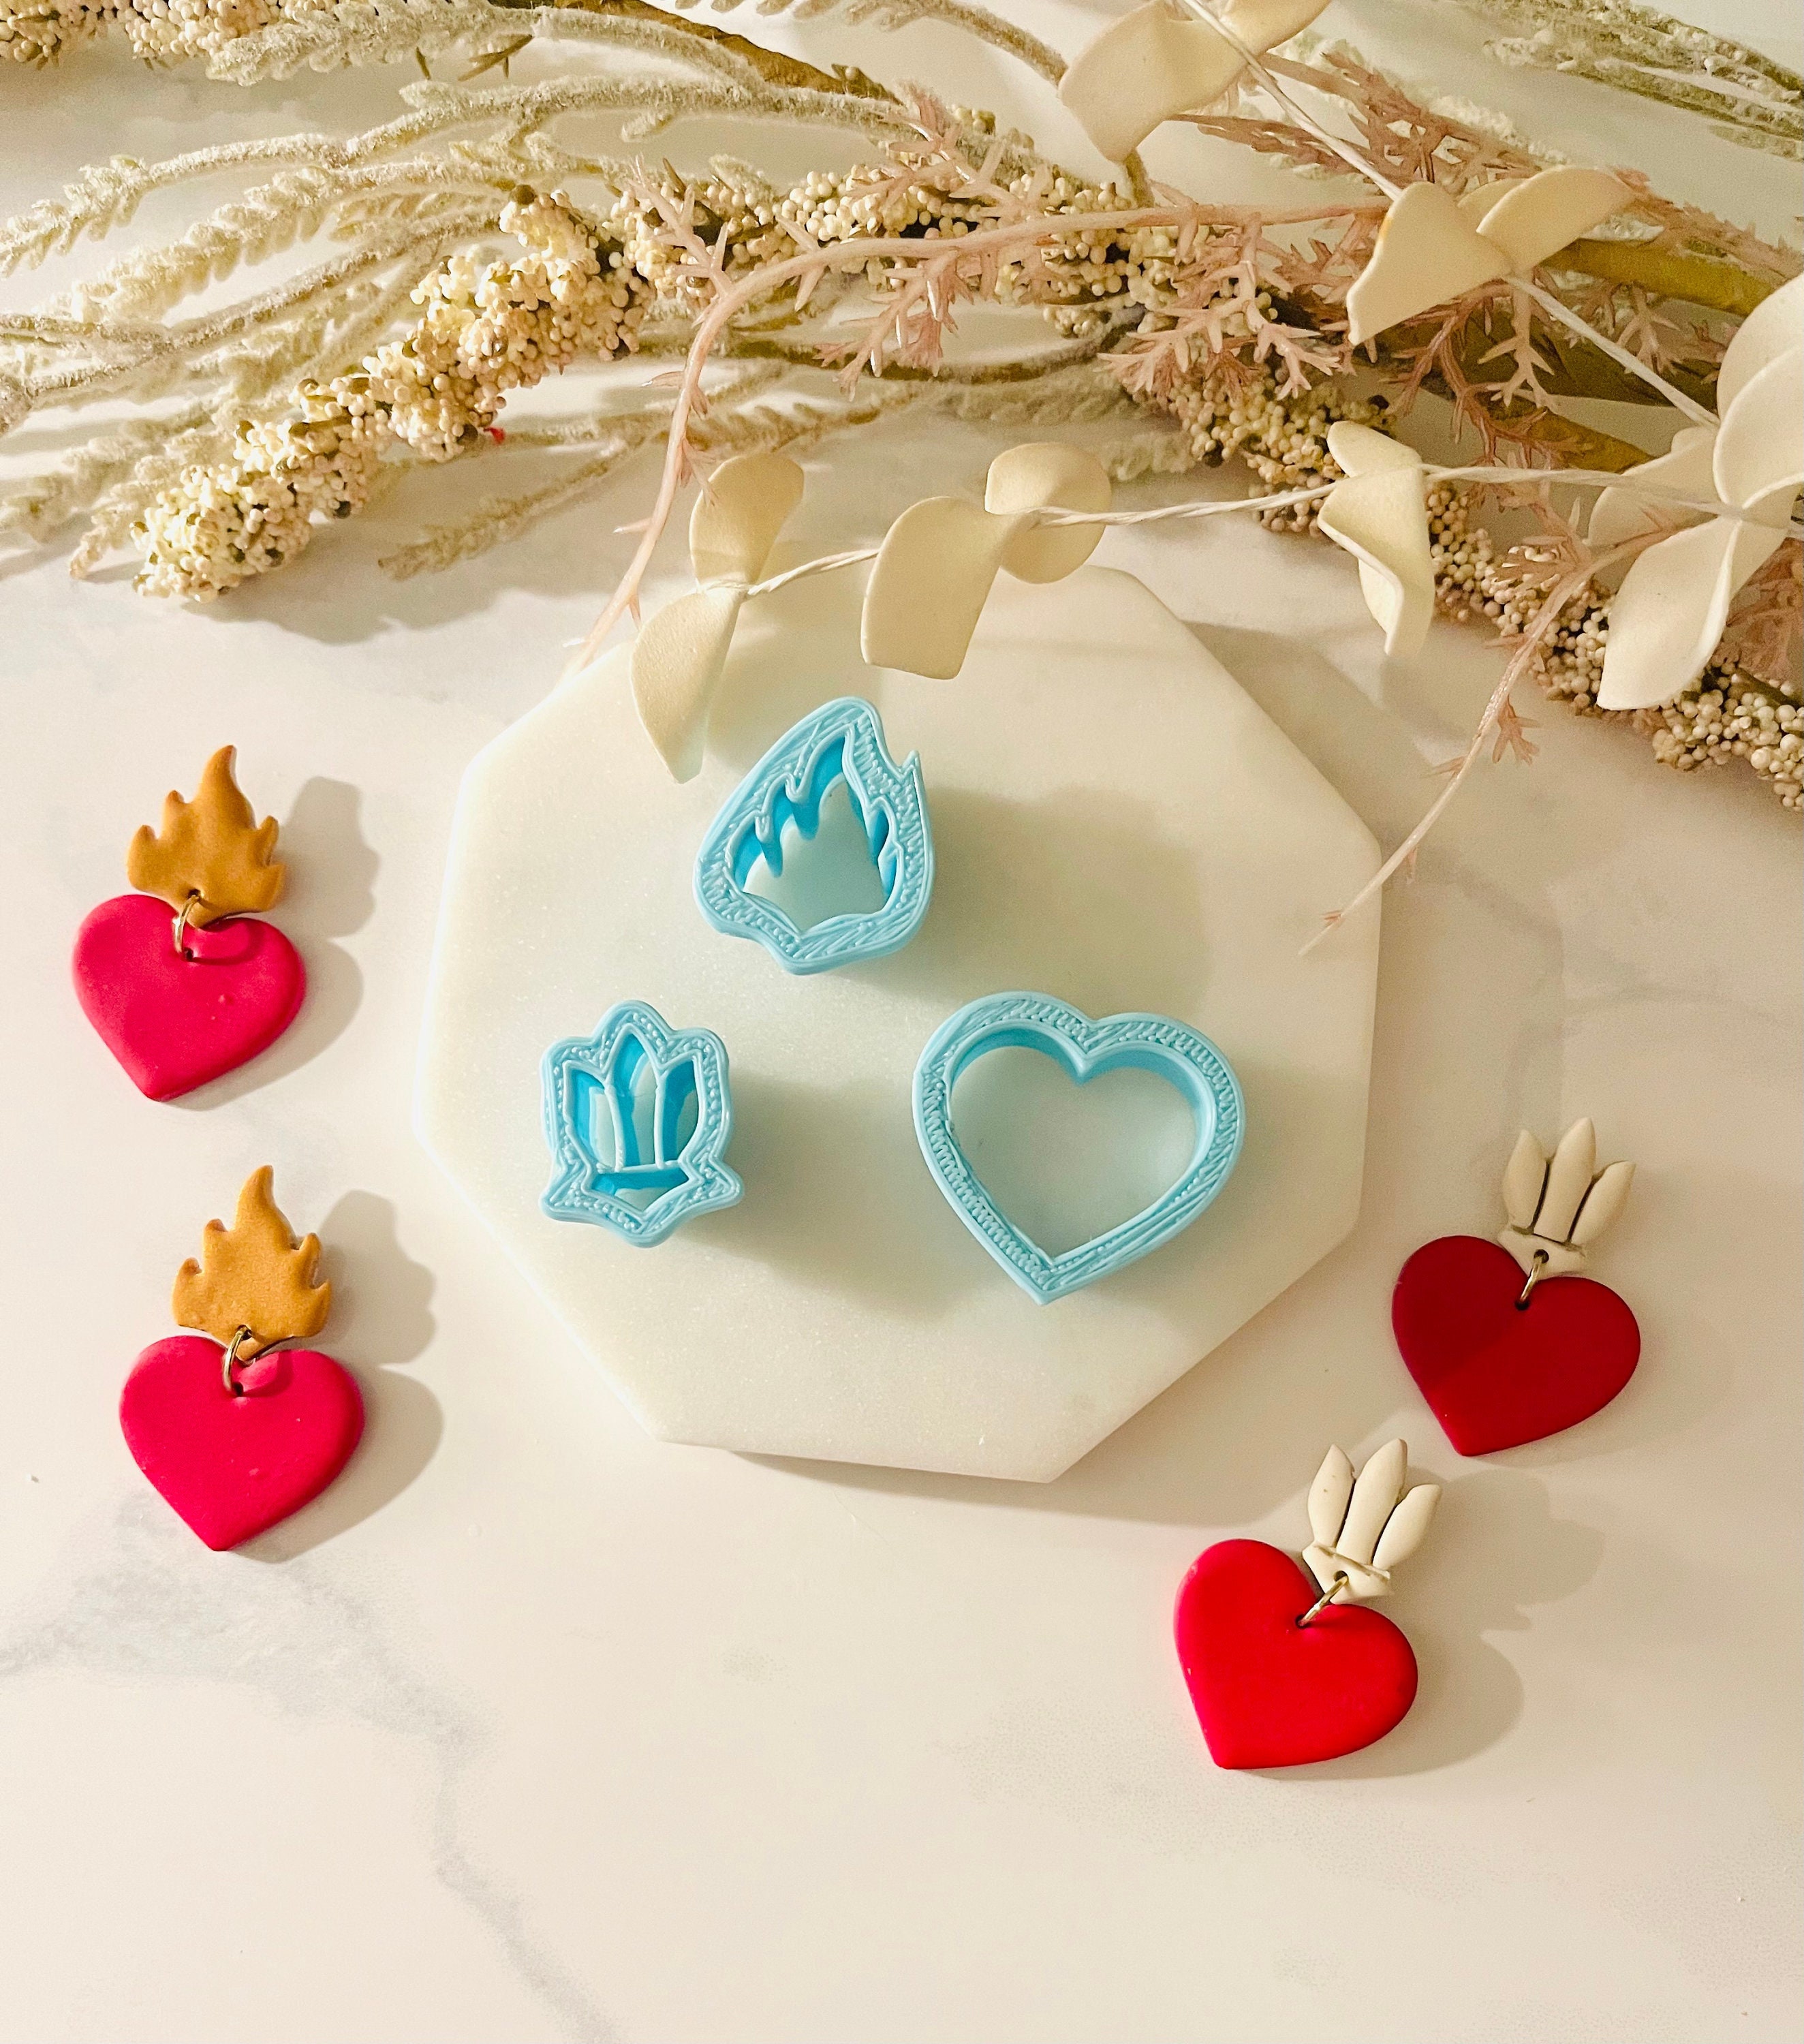 Sacred Heart Clay Cutter Shape Cutter for Polymer Clay Earrings Love Heart  Clay Cutter for Jewlery and Earrings Mexican Folk Art 